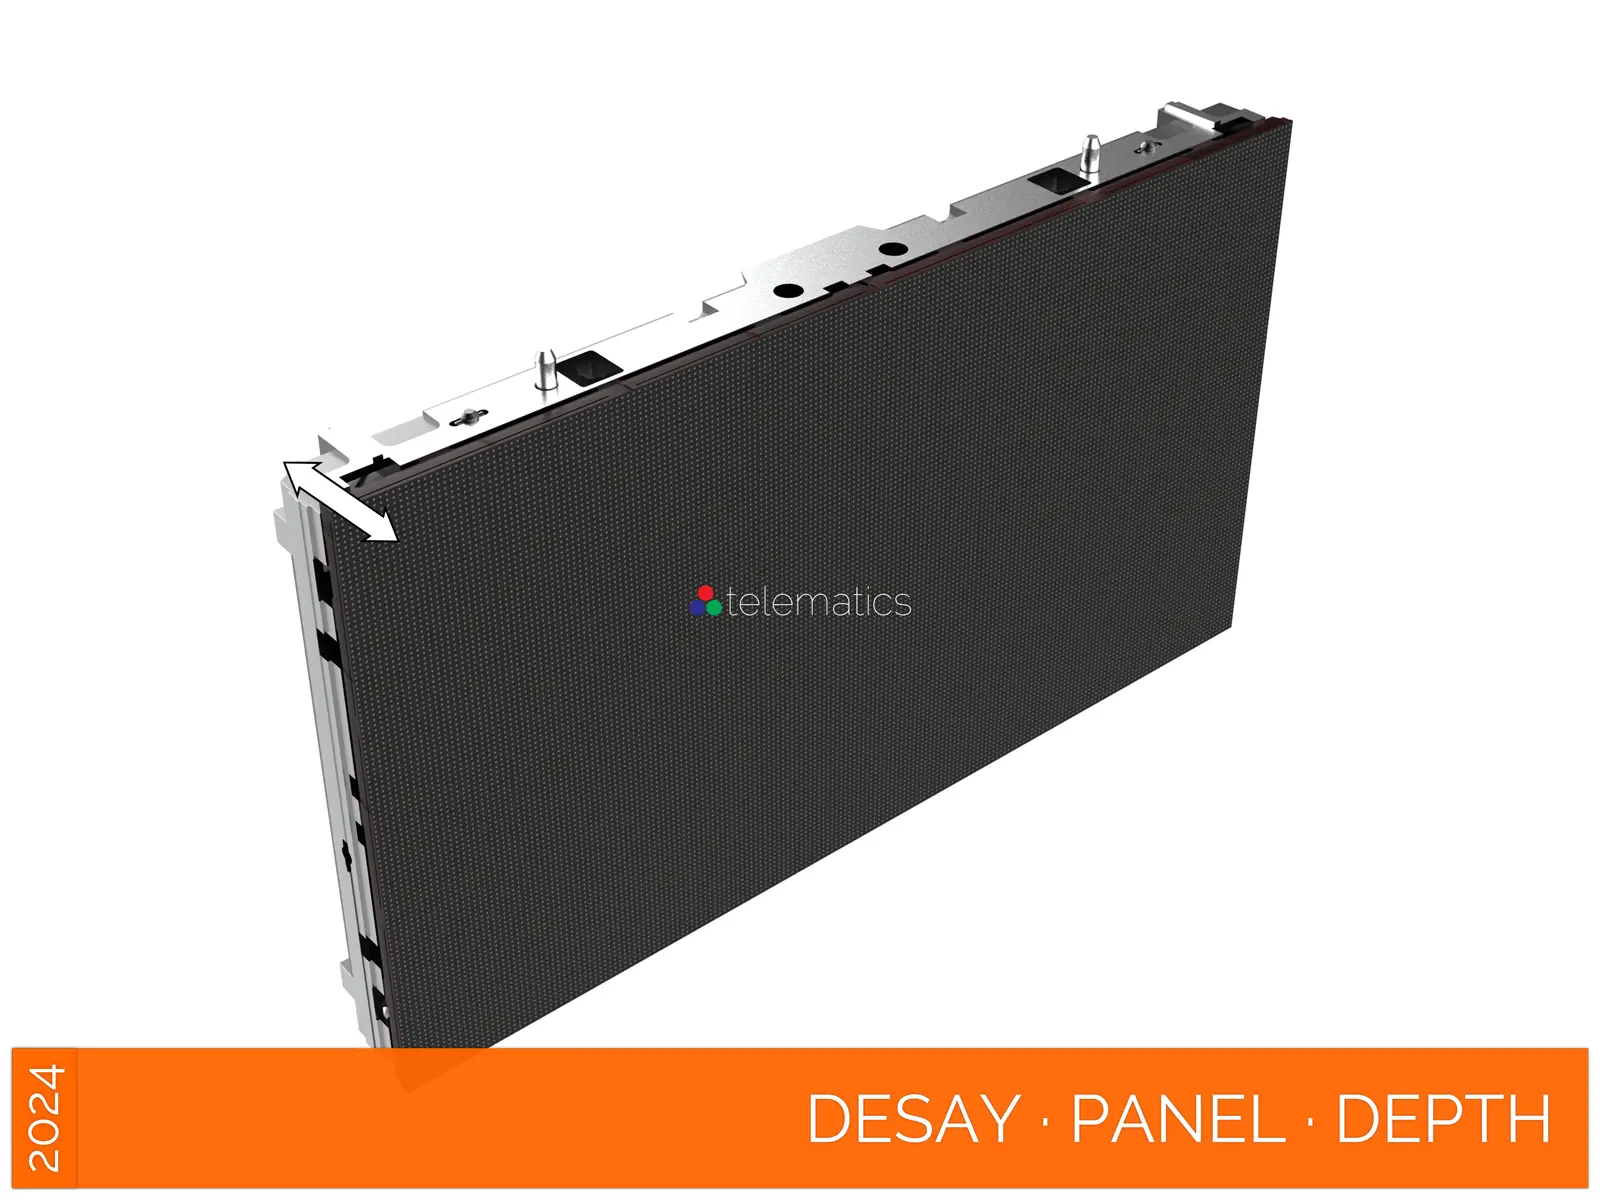 Desay · Series · Direct View LED Display Panel · Full Pixel Range · Panel Dimensions · Width · Height · Depth · Weight · NovaStar COEX MX CX · Vision Management Platform · Viplex · review · price · cost